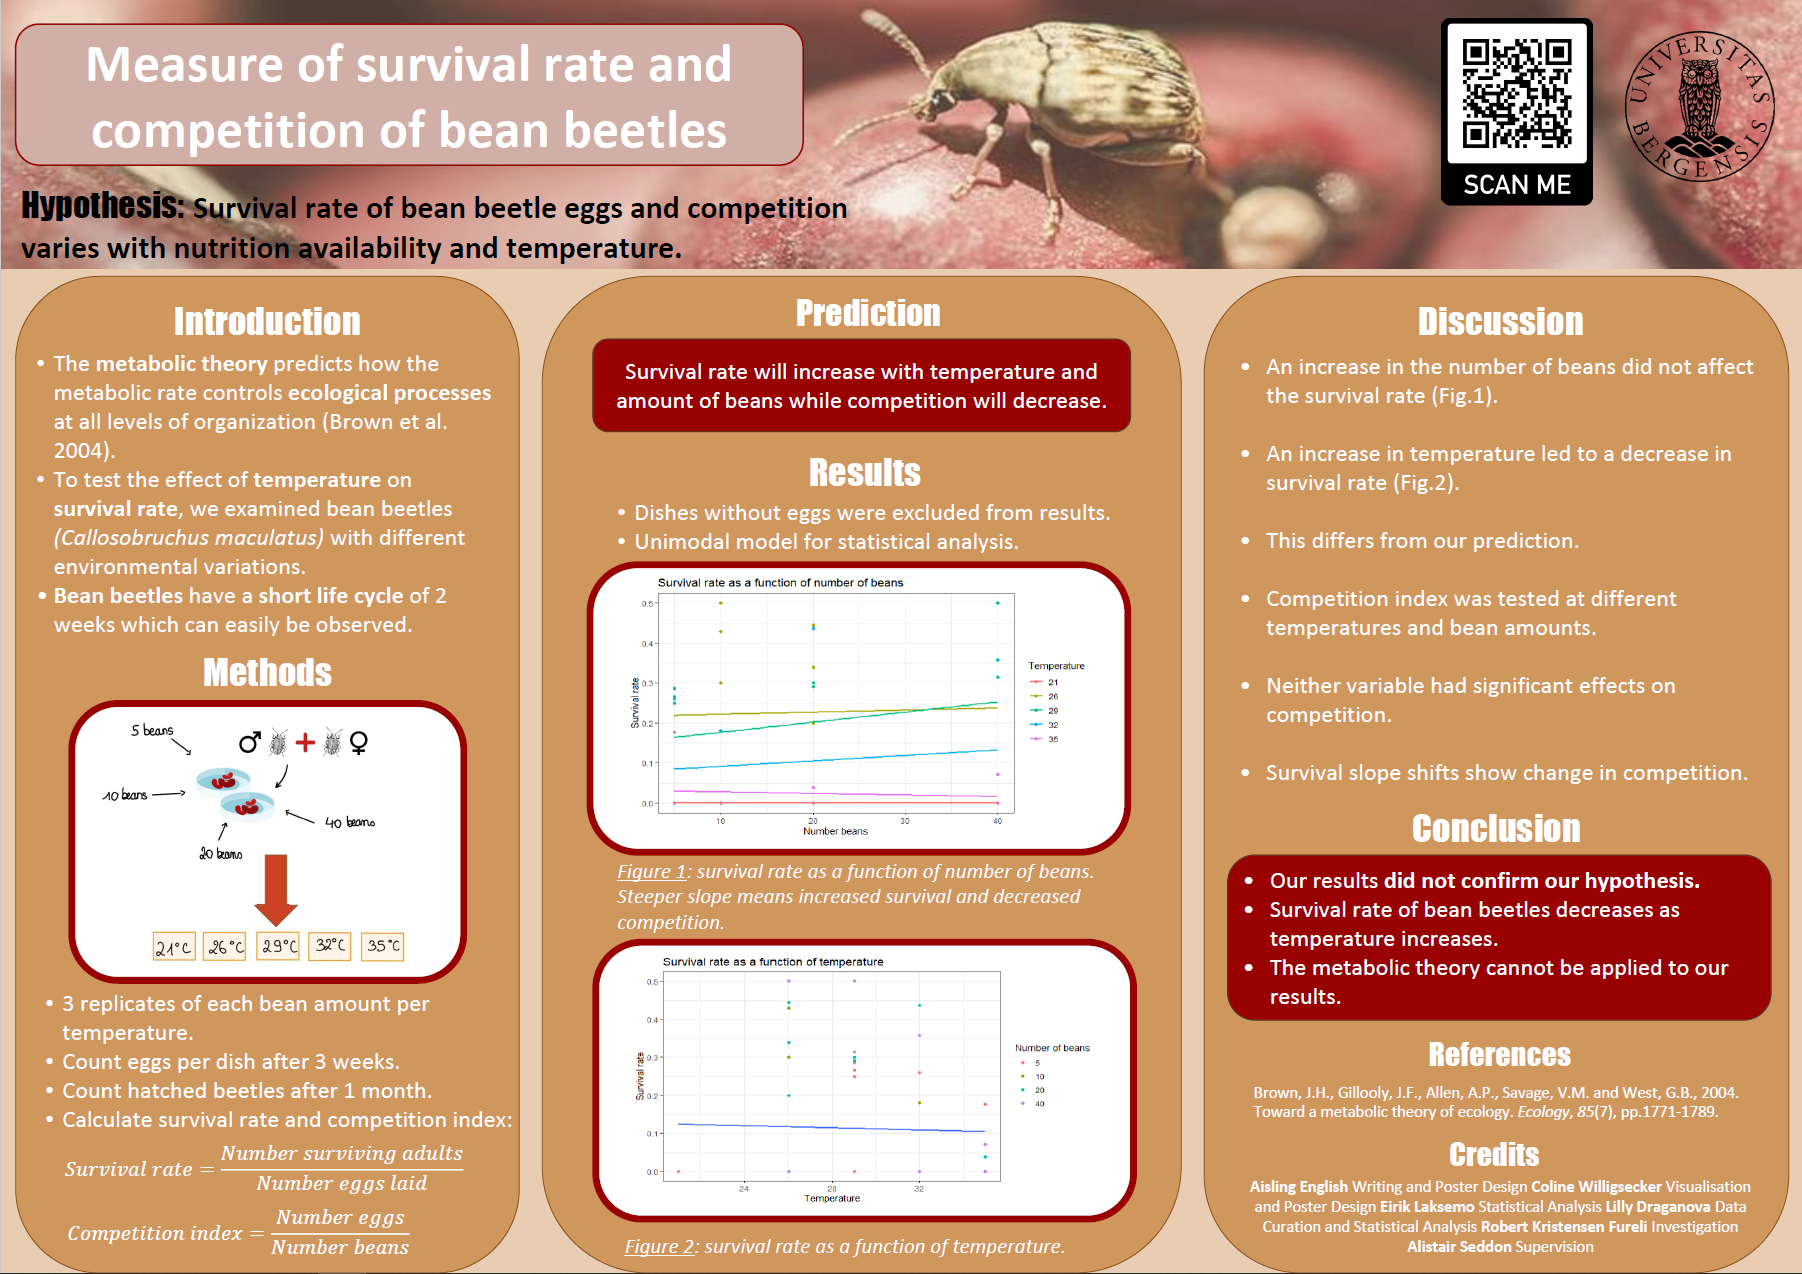 Measure of survival rate and competition of bean beetles